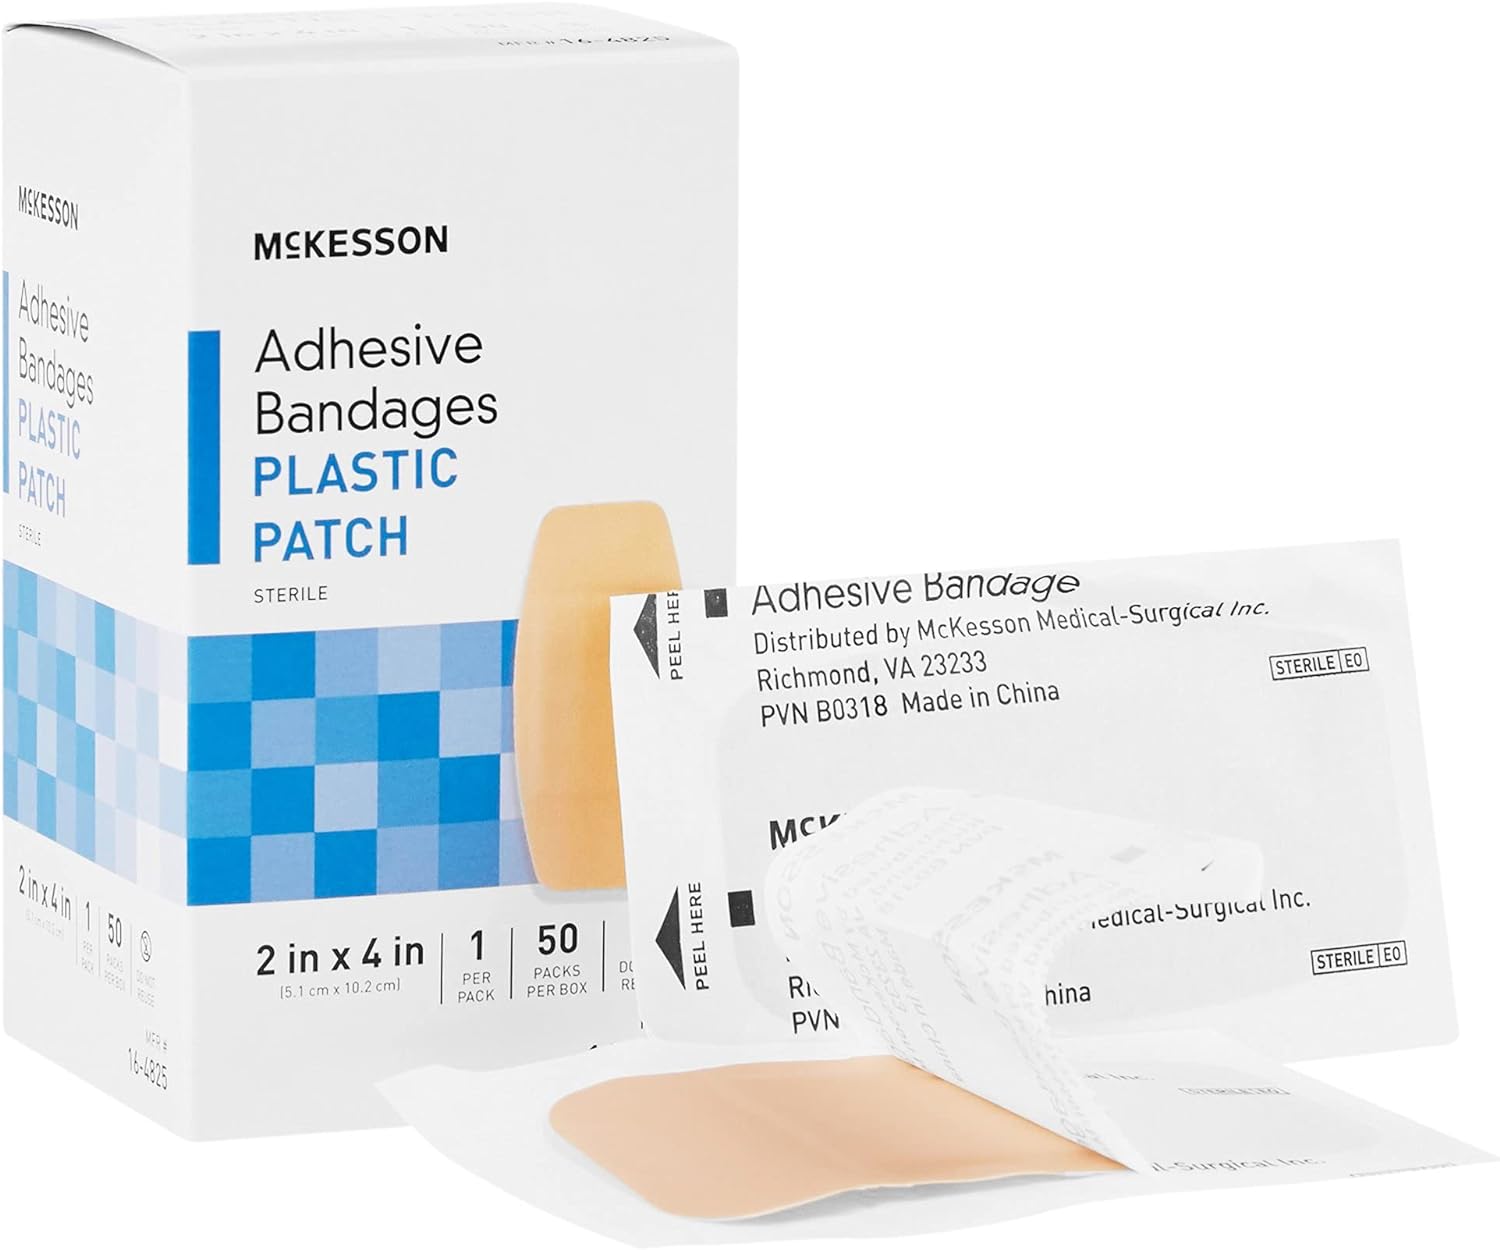 McKesson Adhesive Bandages, Sterile Plastic Patch Rectangle, Tan, 2 in x 4 in, 50 Count, 1 Pack